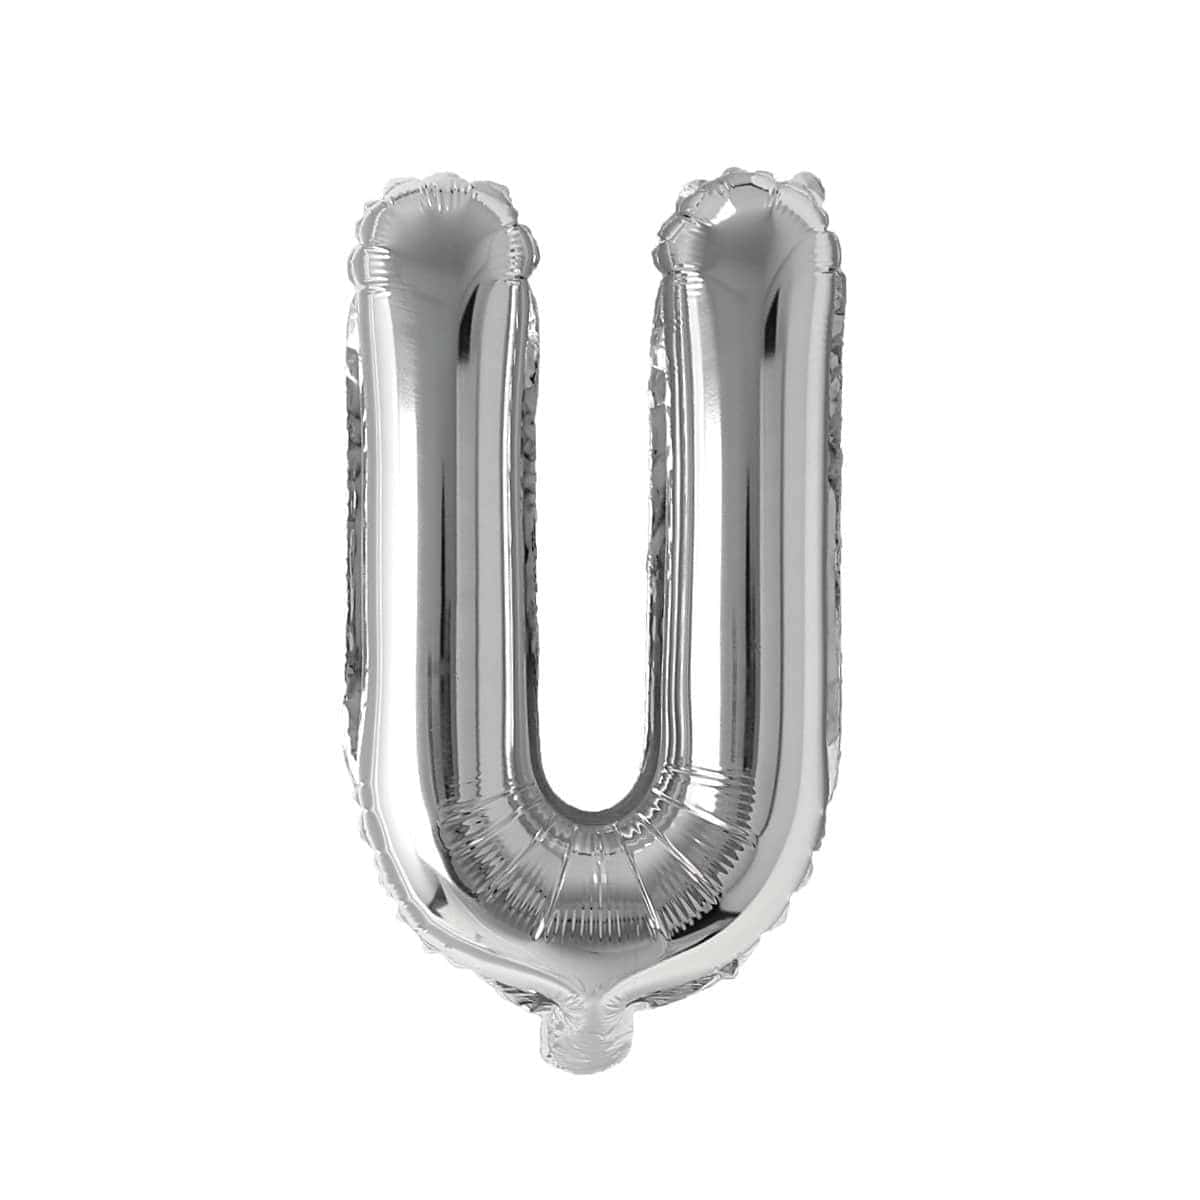 Buy Balloons Silver Letter U Foil Balloon, 16 Inches sold at Party Expert